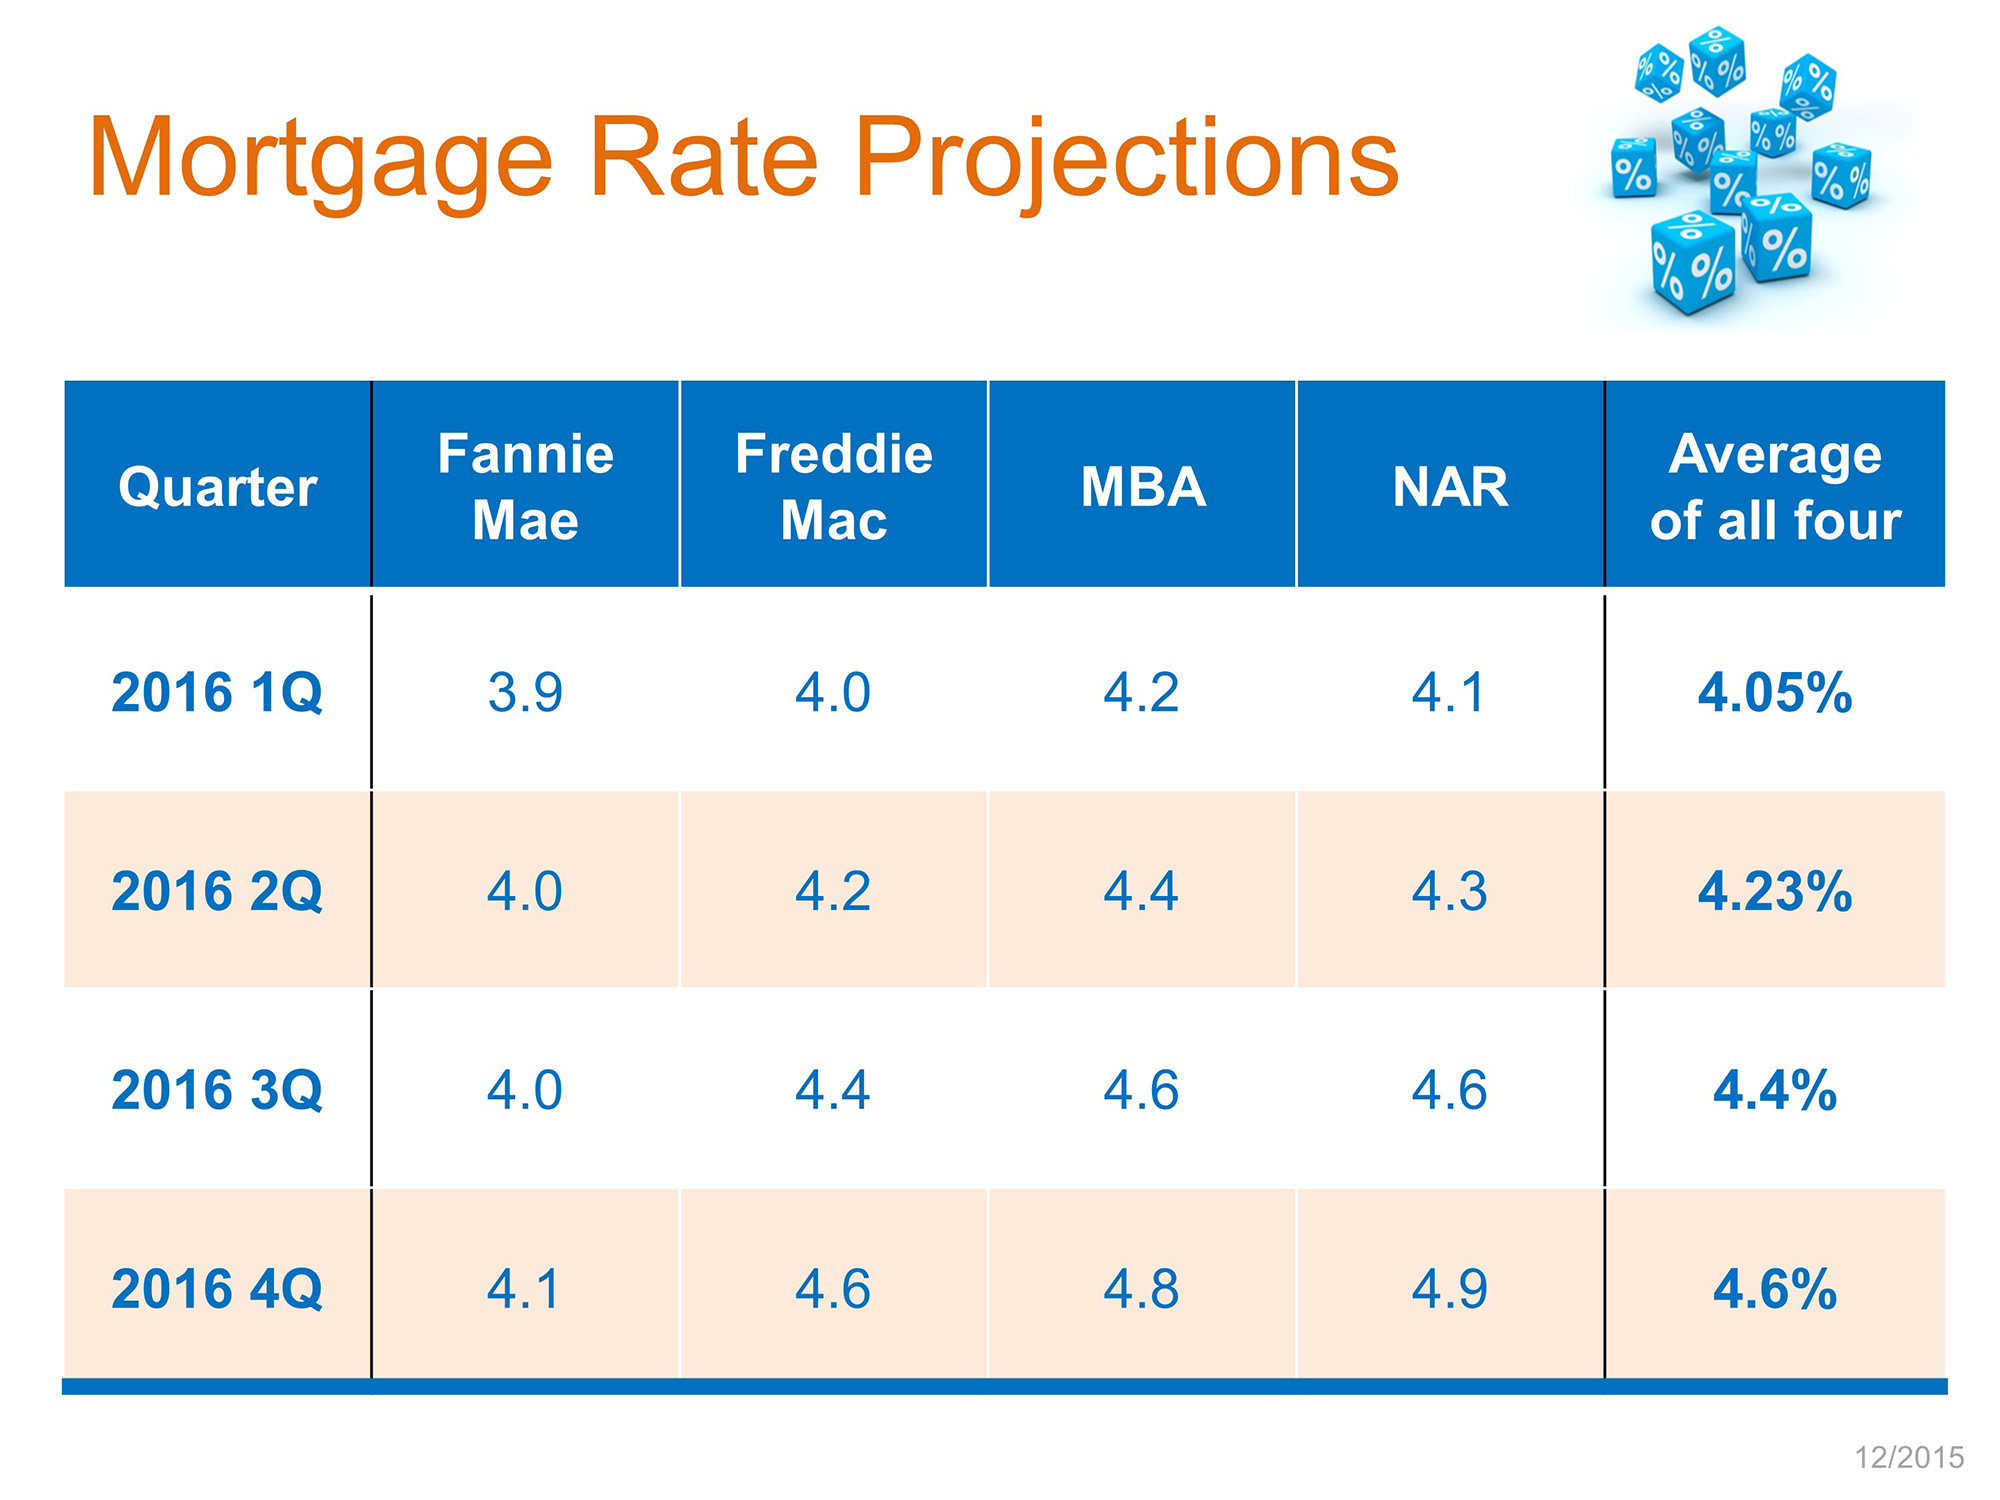 Mortgage Rate Projections for 2016